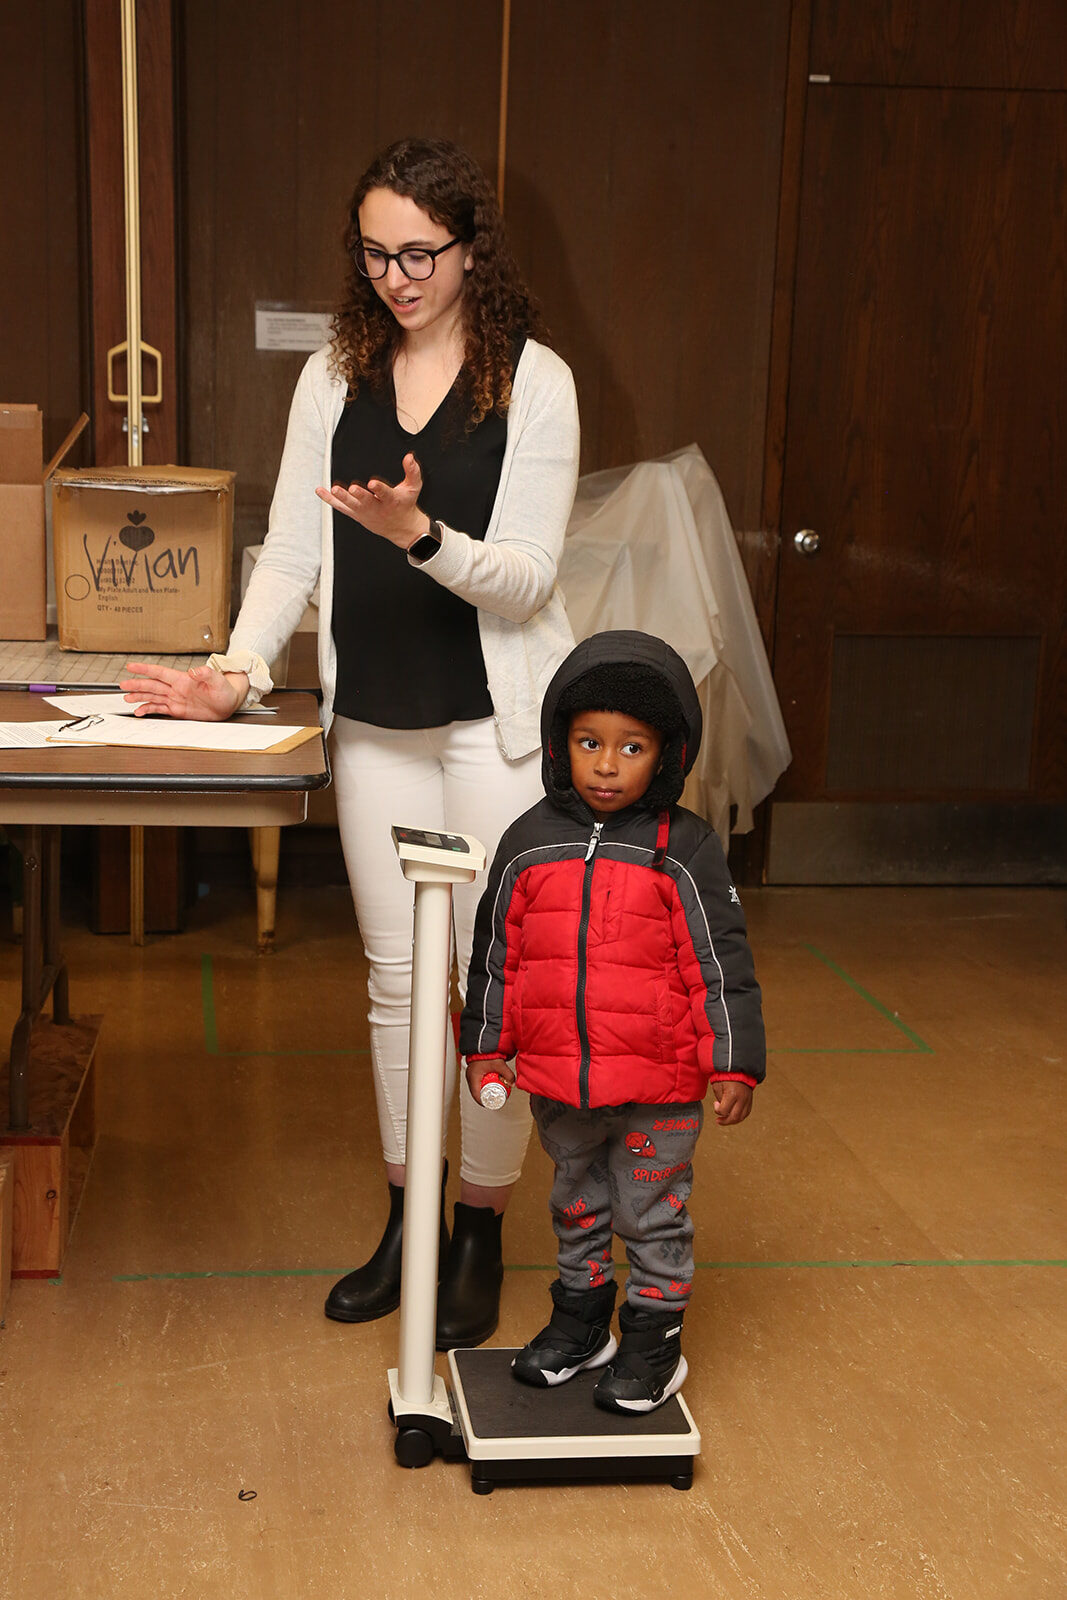 A young child in a winter coat stands on a scale near PharmD student Kathryn Frietag